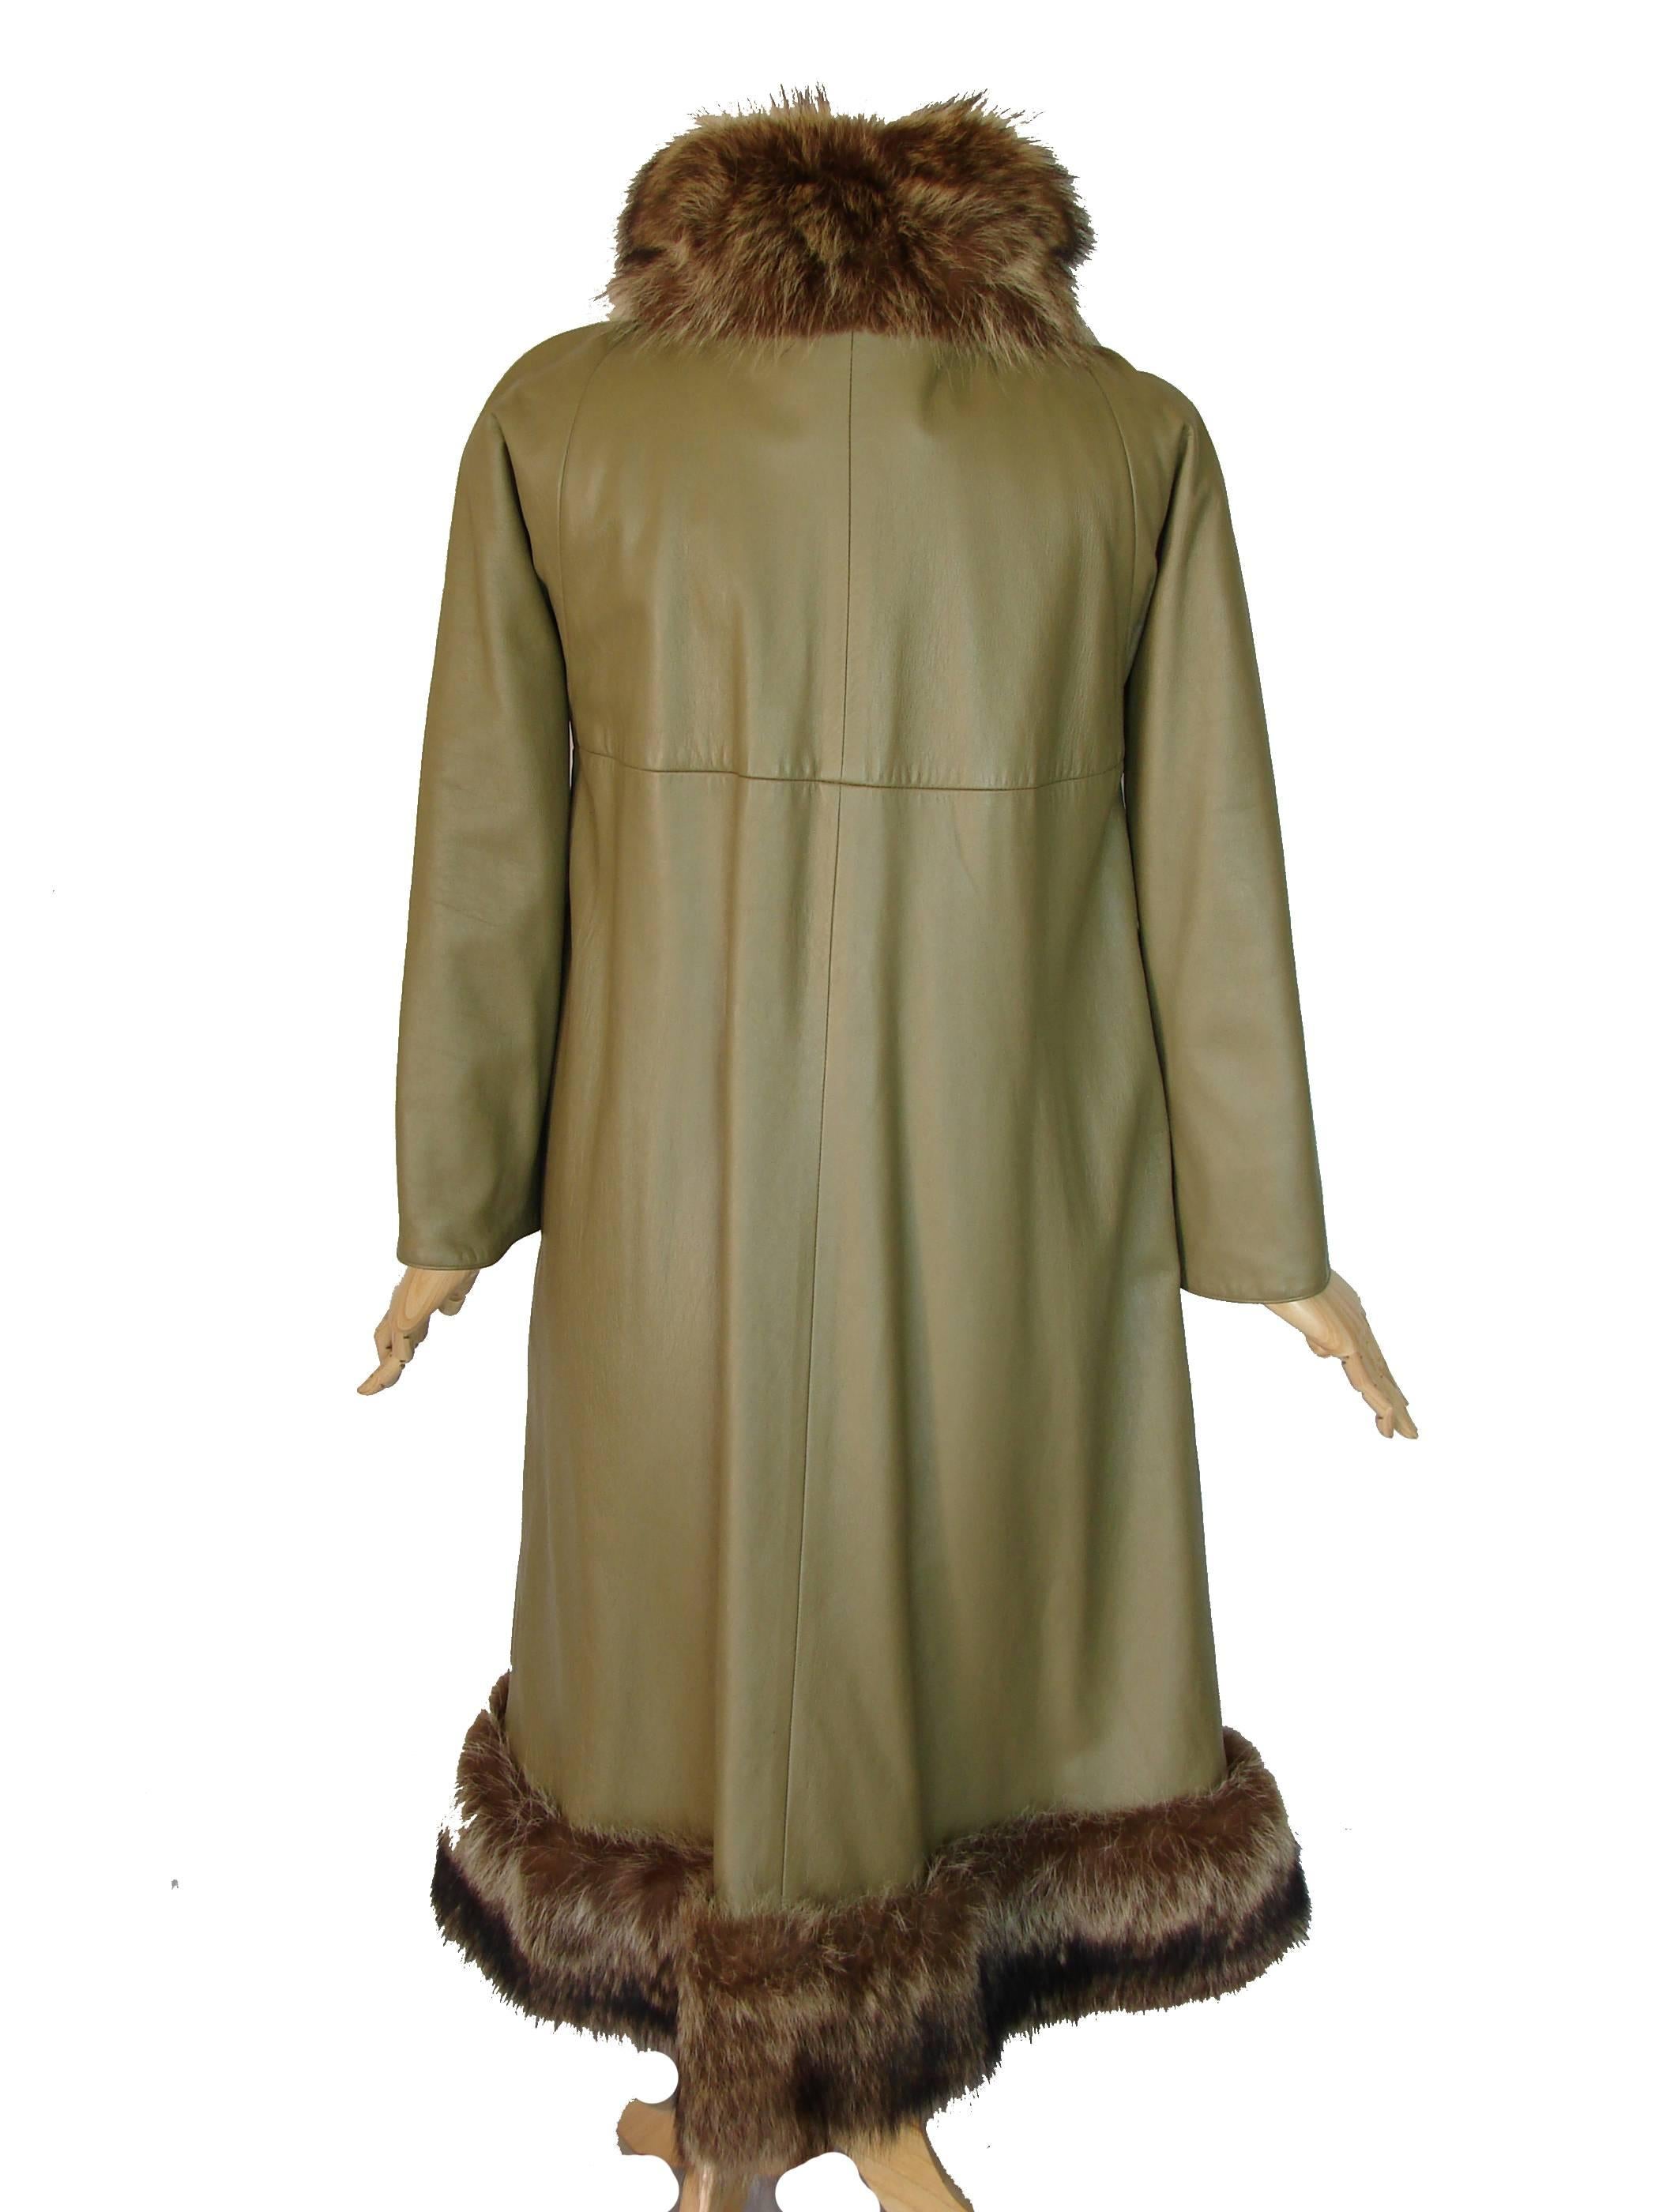 Bonnie Cashin for Sills Leather Swing Coat with Raccoon Fur Trim 1960s Sz M In Excellent Condition In Port Saint Lucie, FL